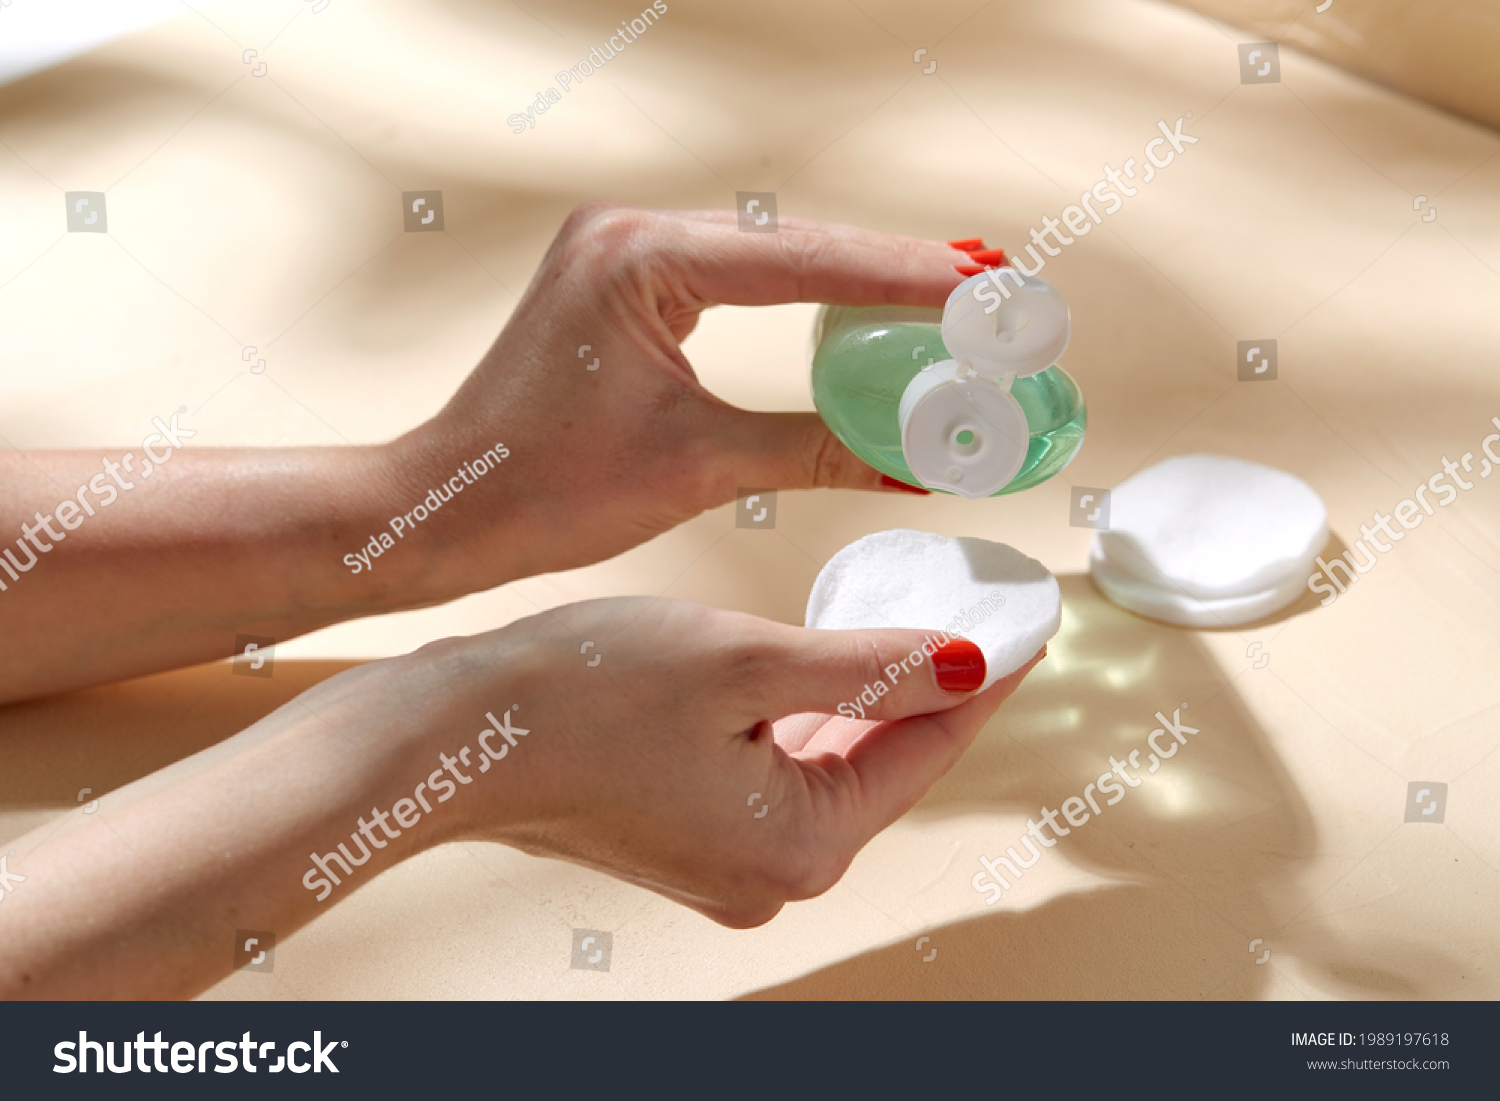 beauty, cosmetics and skincare concept - close up of hands applying lotion to cotton pad over beige background with shadows #1989197618